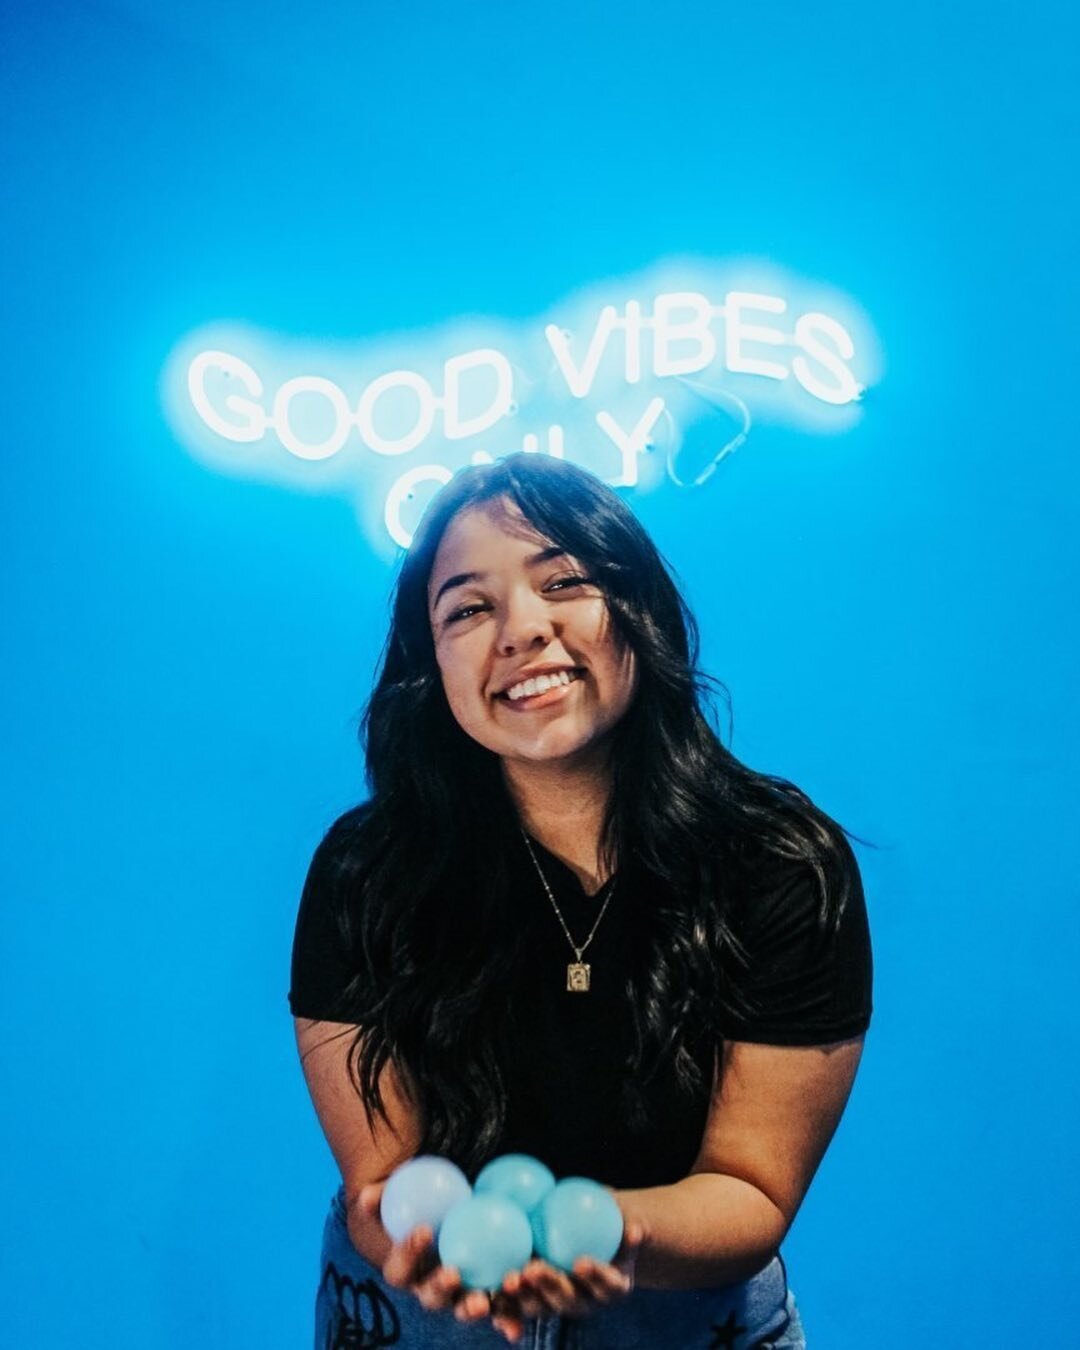 📸⚡️YES. YES. YES! Good Vibes Only! One of our favorite rooms, the ball pit room! 

Weekend Times: 
Thursday 3-9pm 
Friday 1-6pm *private event after 6pm
Saturday 1-5pm *private event after 5pm

#weekendplans #selfiestudio